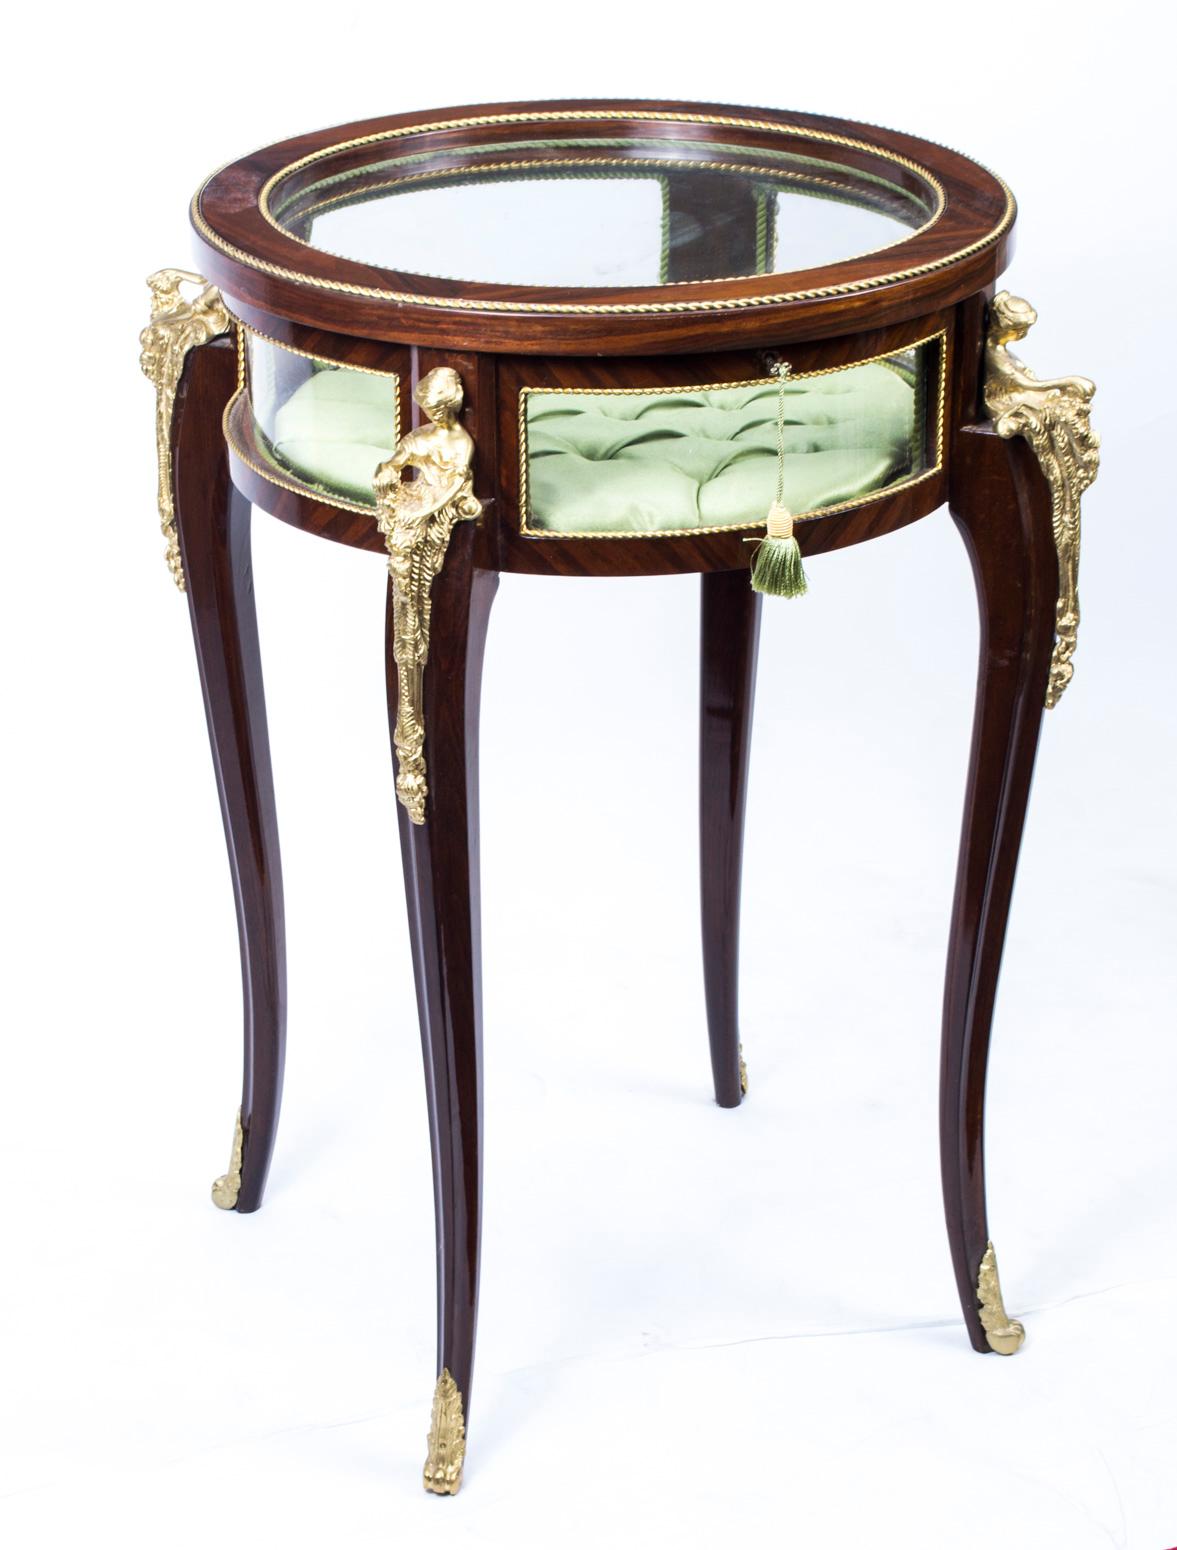 This elegant little display table is in the style of the Louis XVI period, and dates from the last quarter of the 20th century.

It is carefully crafted in rich rosewood with exquisite ormolu mounts, and it has a plush satin interior. 

It